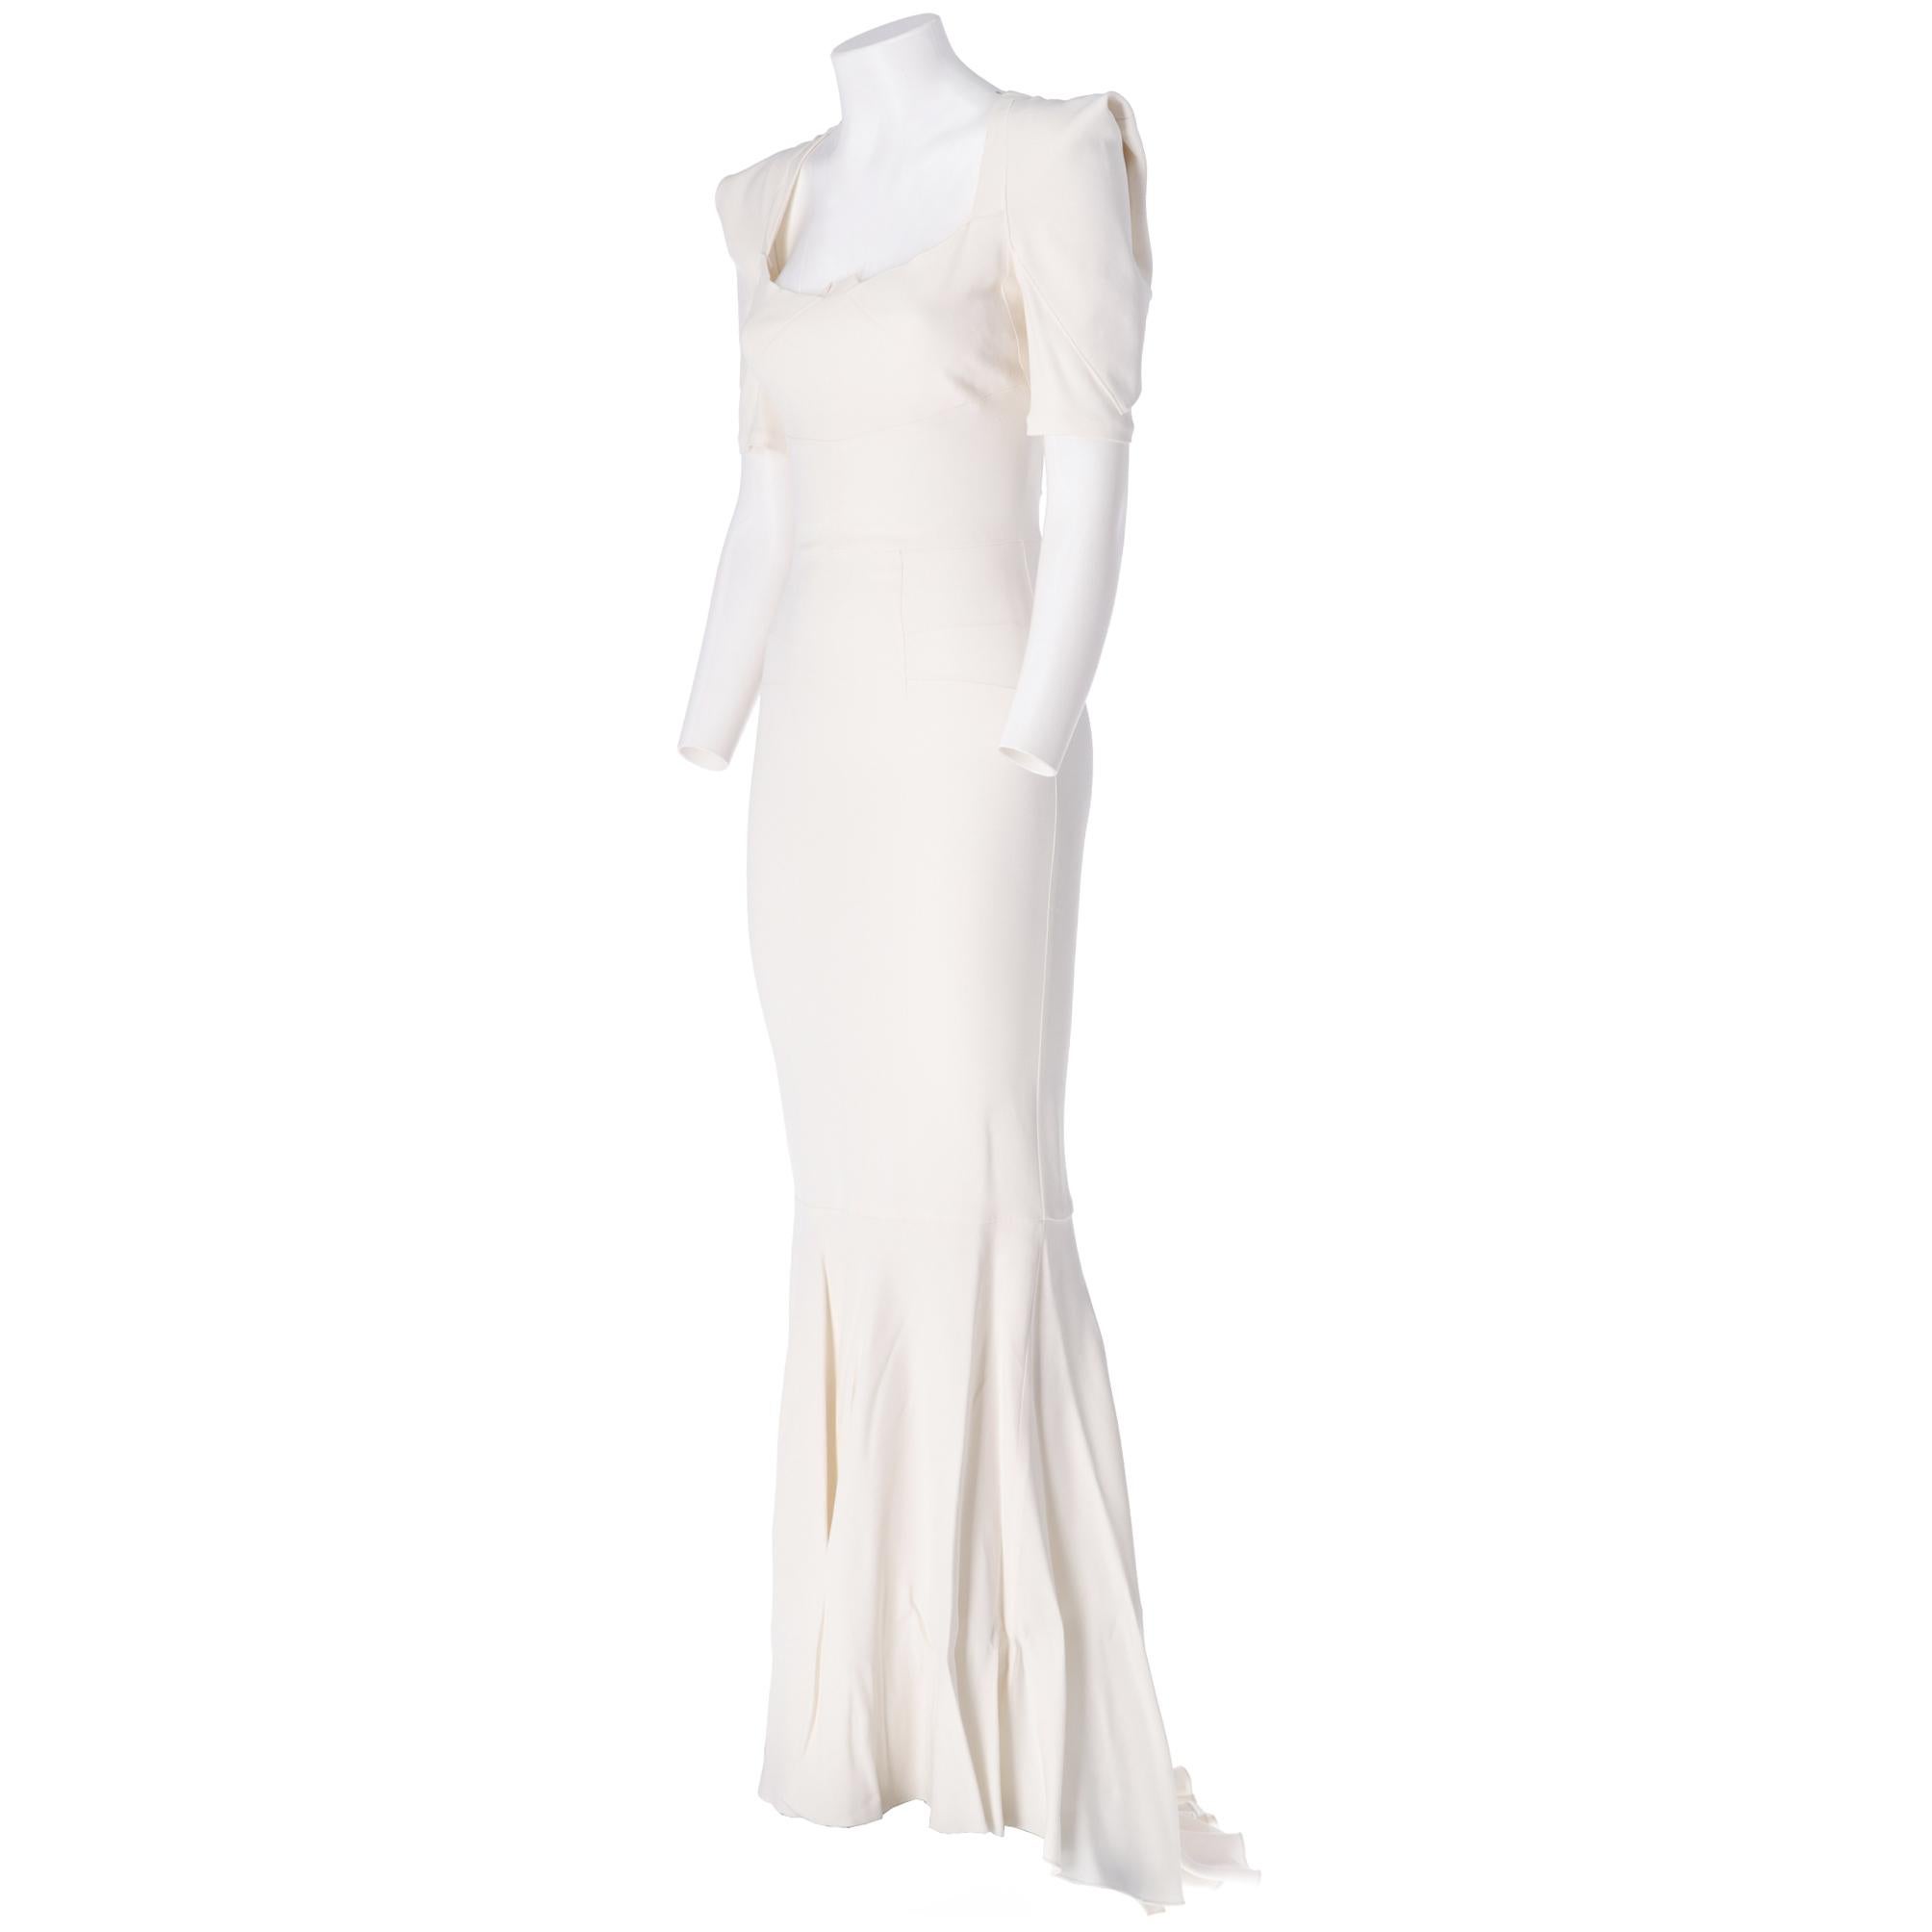 Roland Mouret ivory mermaid wedding dress with train, cut at the waist, long mermaid skirt, square neckline, half sleeves with fantasy design construction, zip closure on the back.

The item has a small stain near the zip on the back and slight